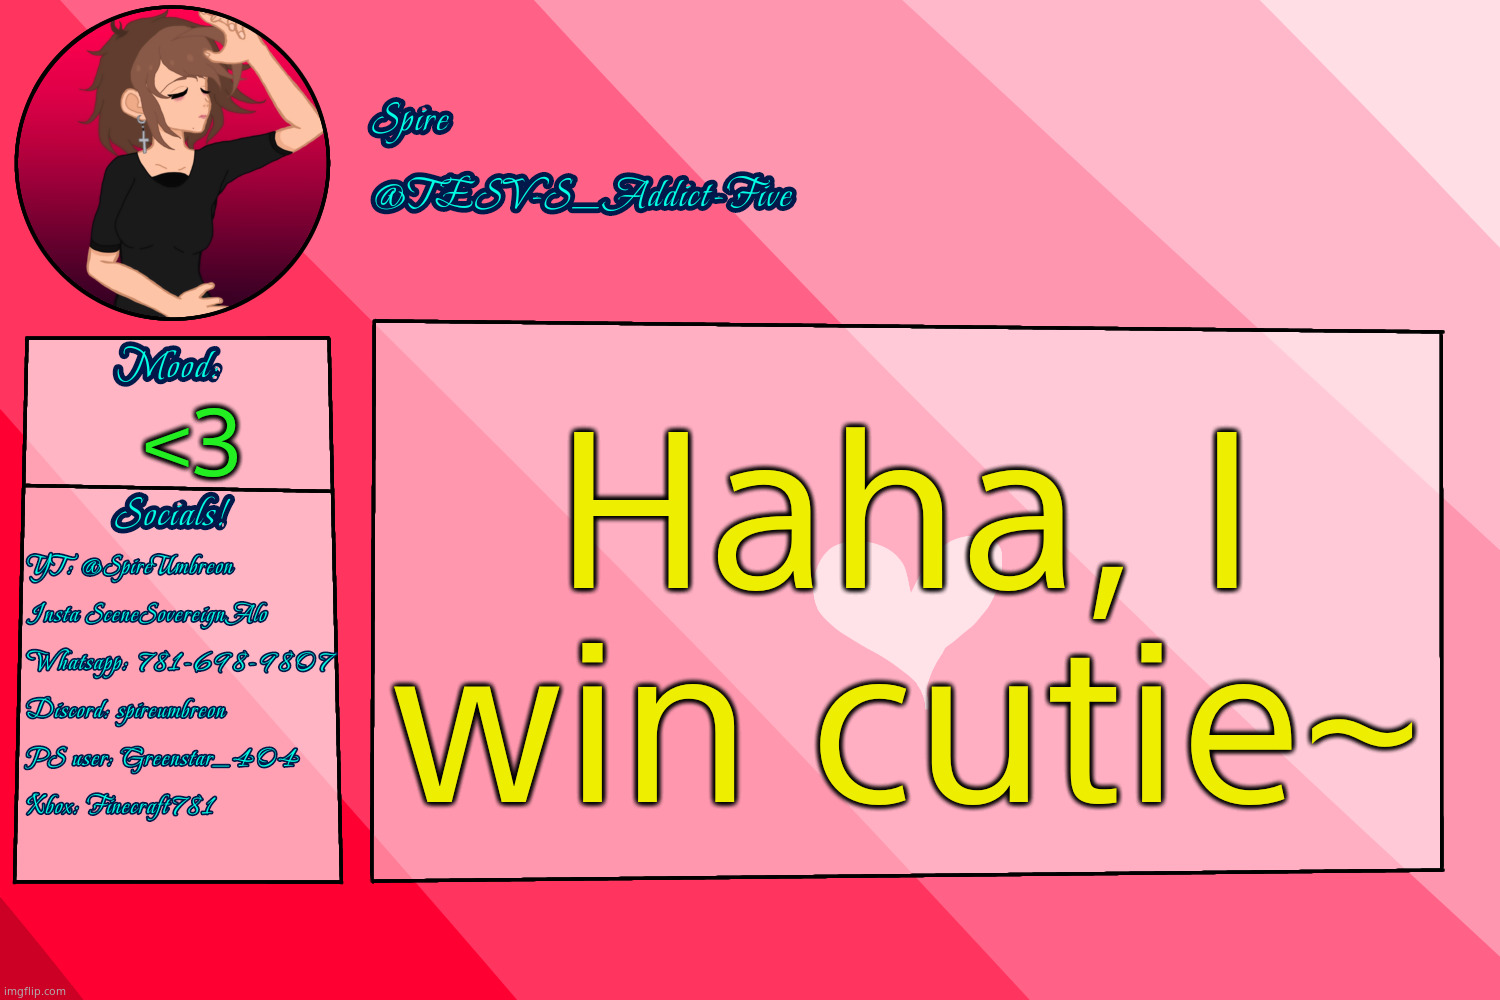 /dir | Haha, I win cutie~; <3 | image tagged in tesv-s_addict-five announcement template | made w/ Imgflip meme maker